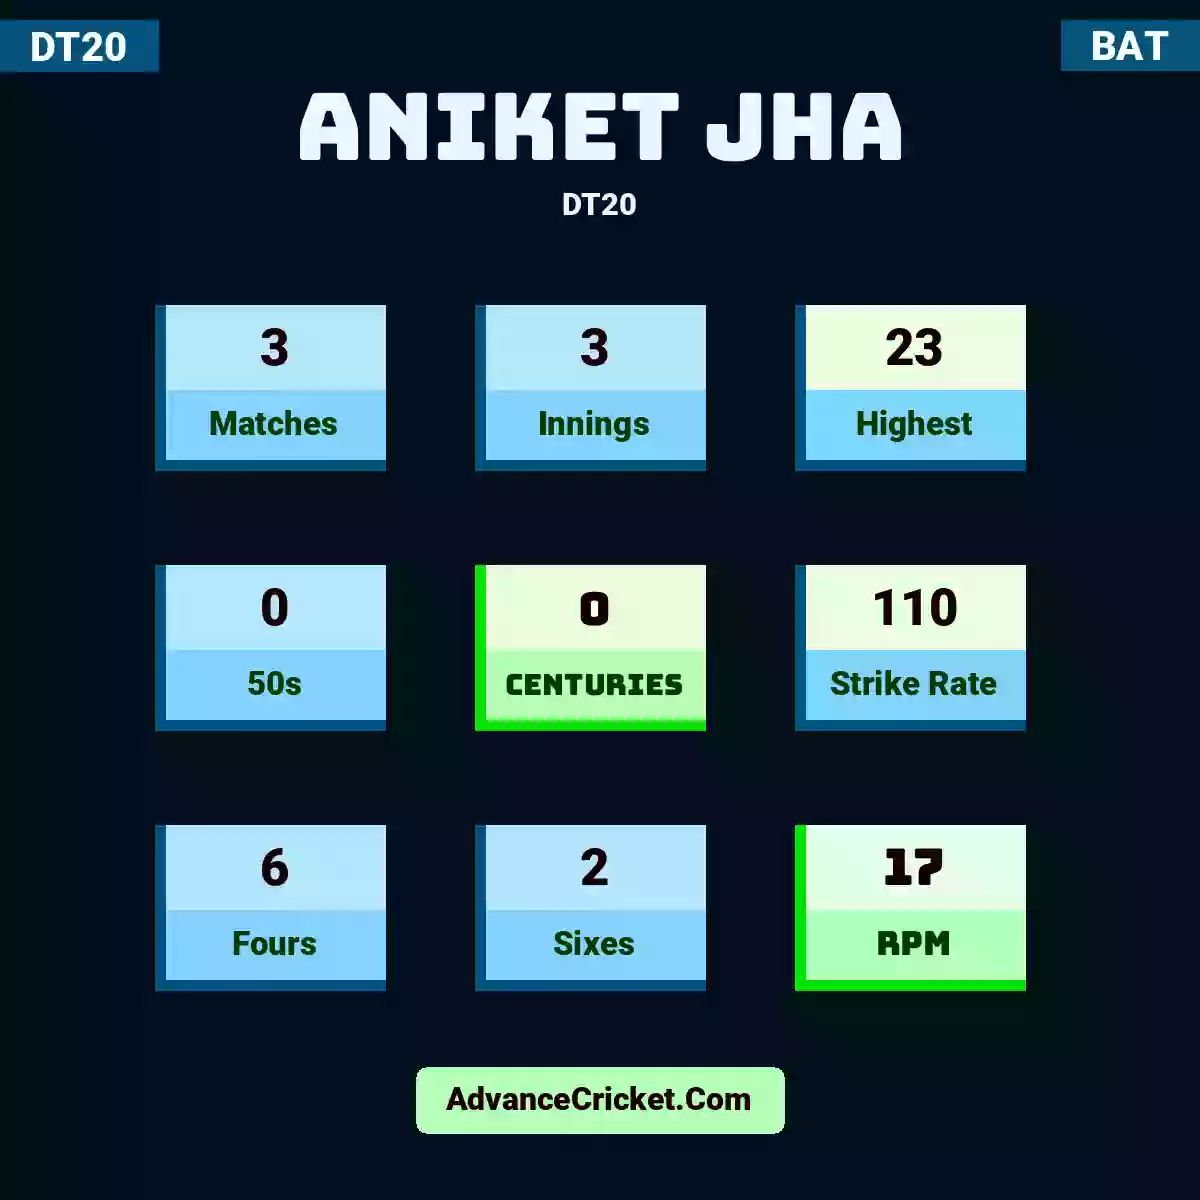 Aniket Jha DT20 , Aniket Jha played 3 matches, scored 23 runs as highest, 0 half-centuries, and 0 centuries, with a strike rate of 110. A.Jha hit 6 fours and 2 sixes, with an RPM of 17.